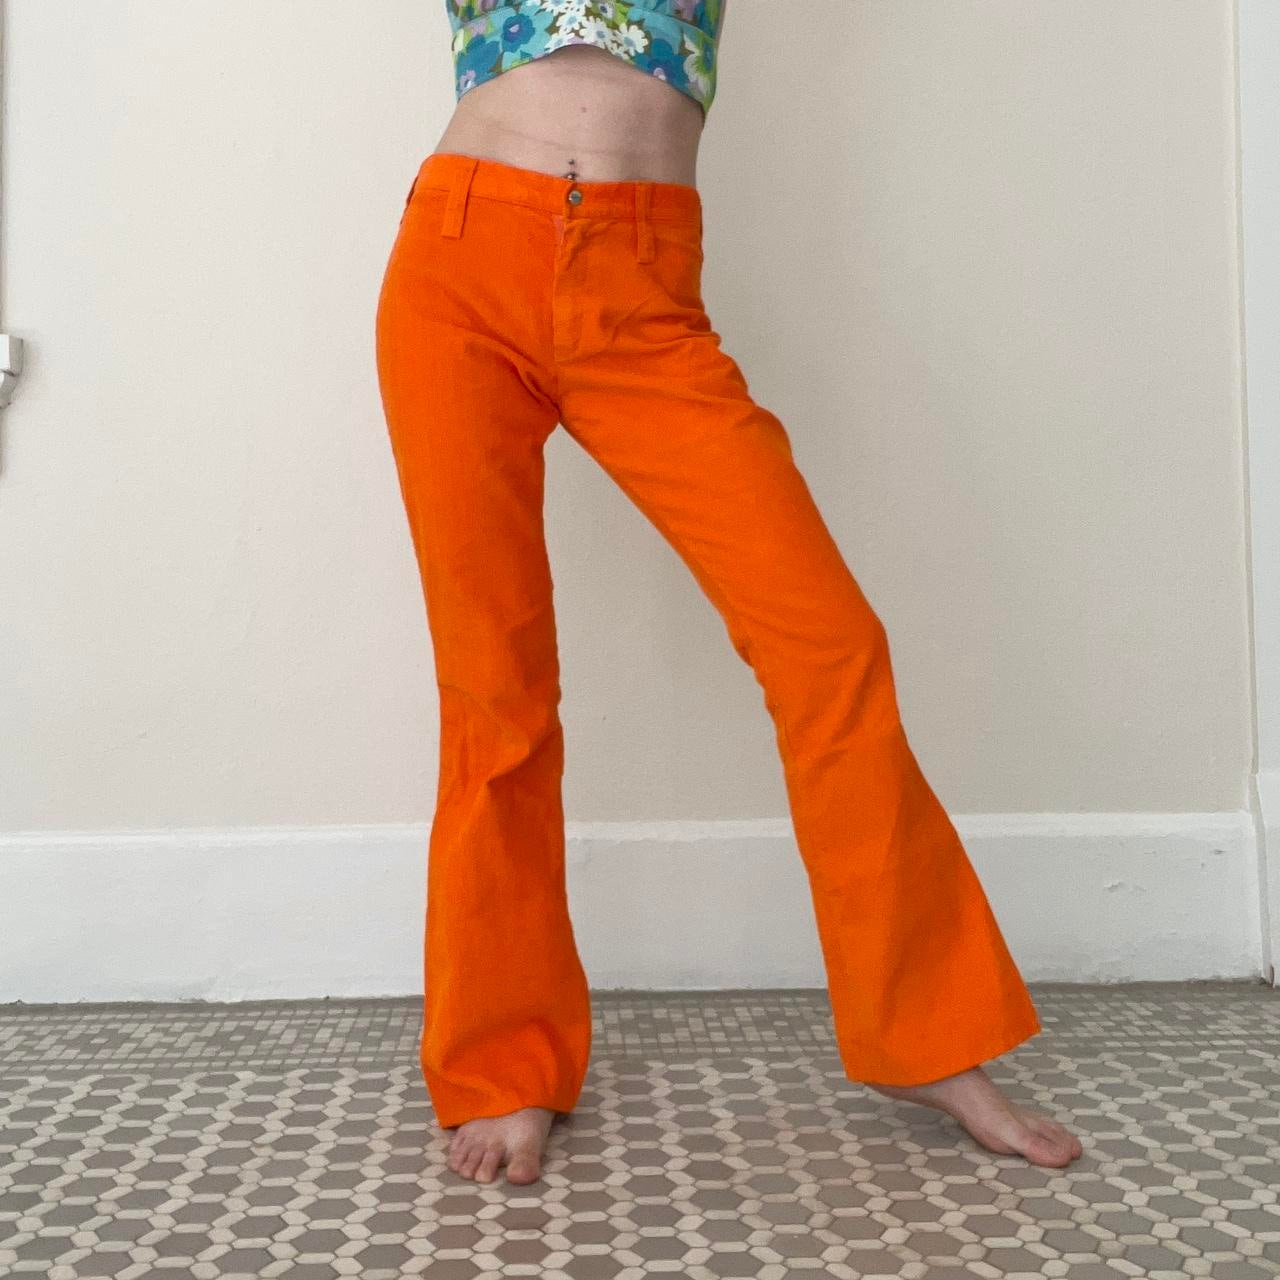 Women Dressed In Varying Shades Of Orange And Bell Bottom Pants